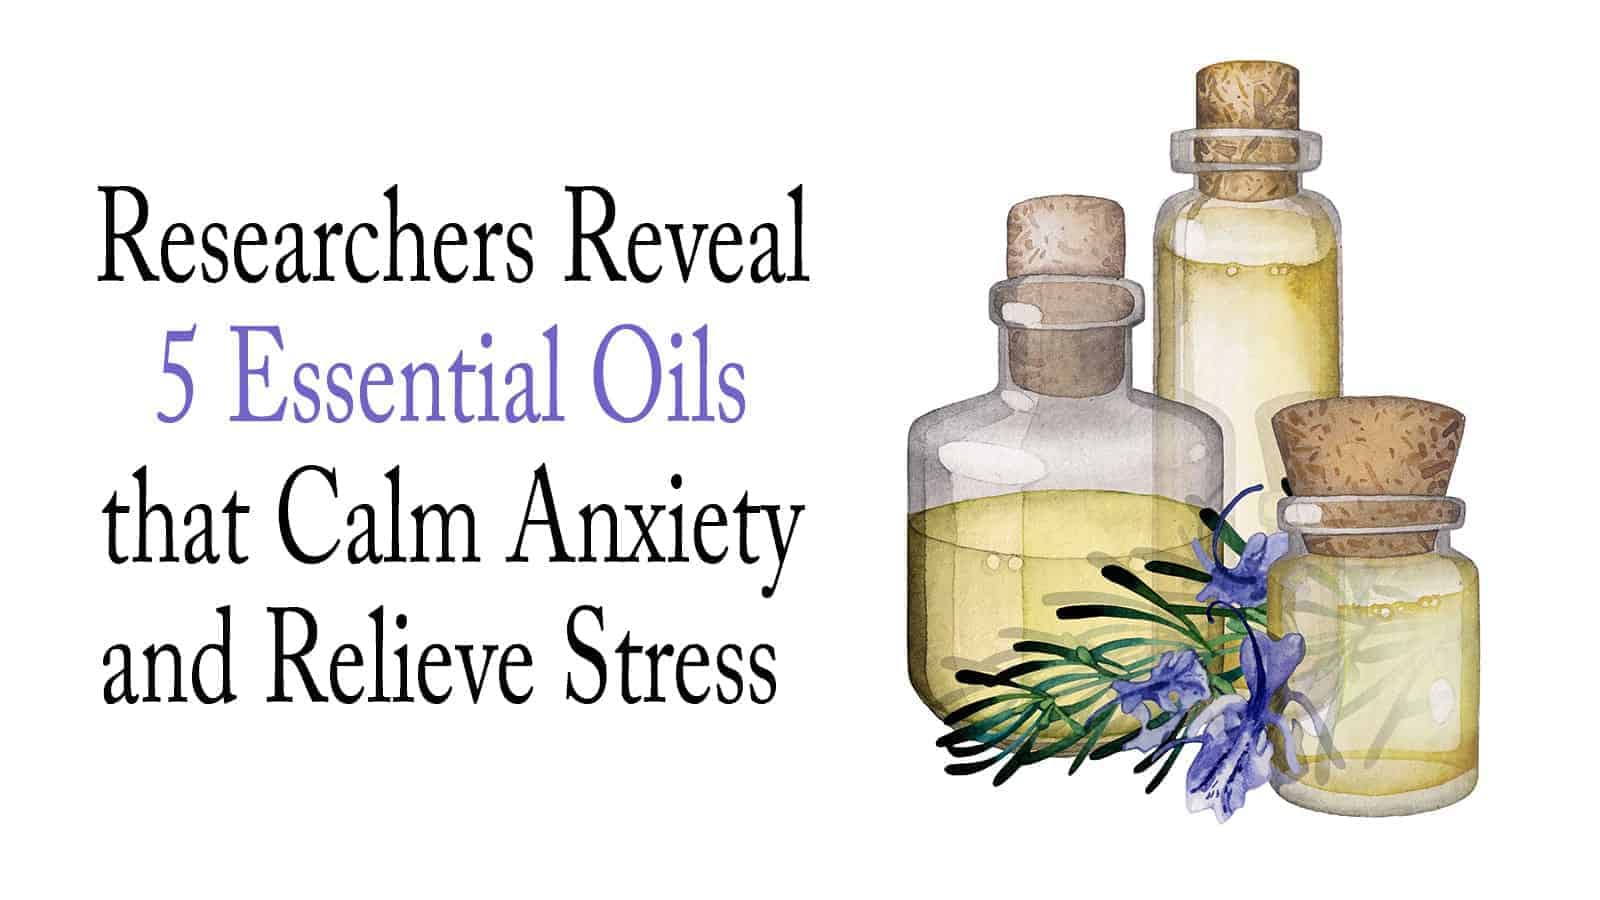 Researchers Reveal 5 Essential Oils that Calm Anxiety and Relieve Stress